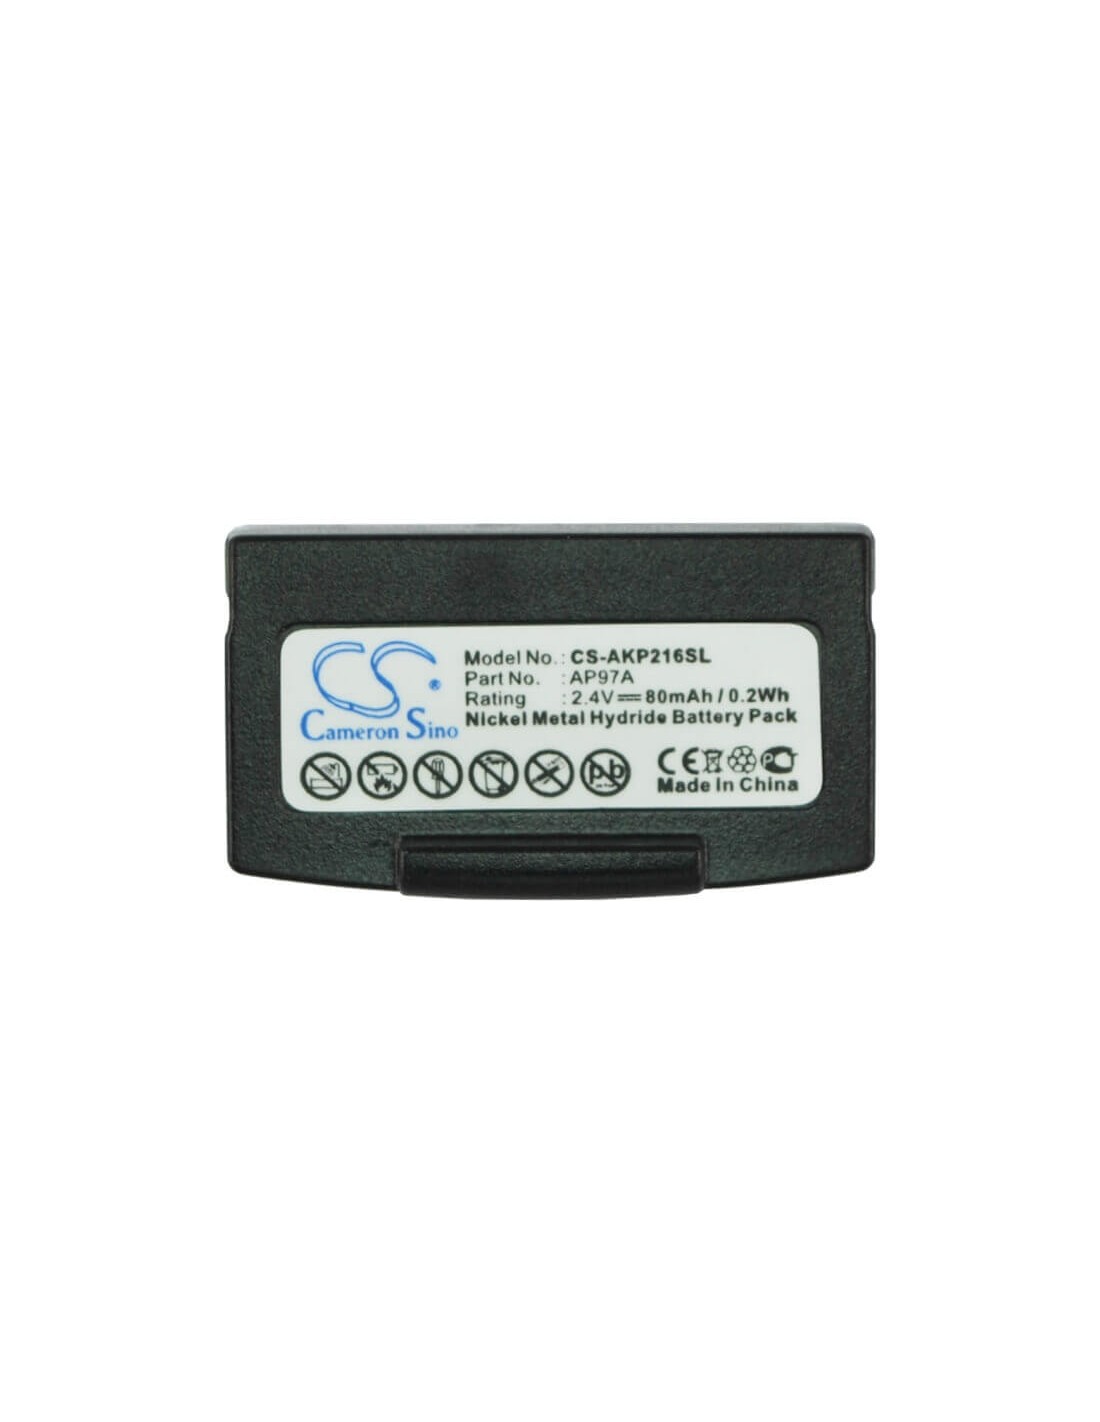 Battery for Clarity C120 2.4V, 80mAh - 0.19Wh